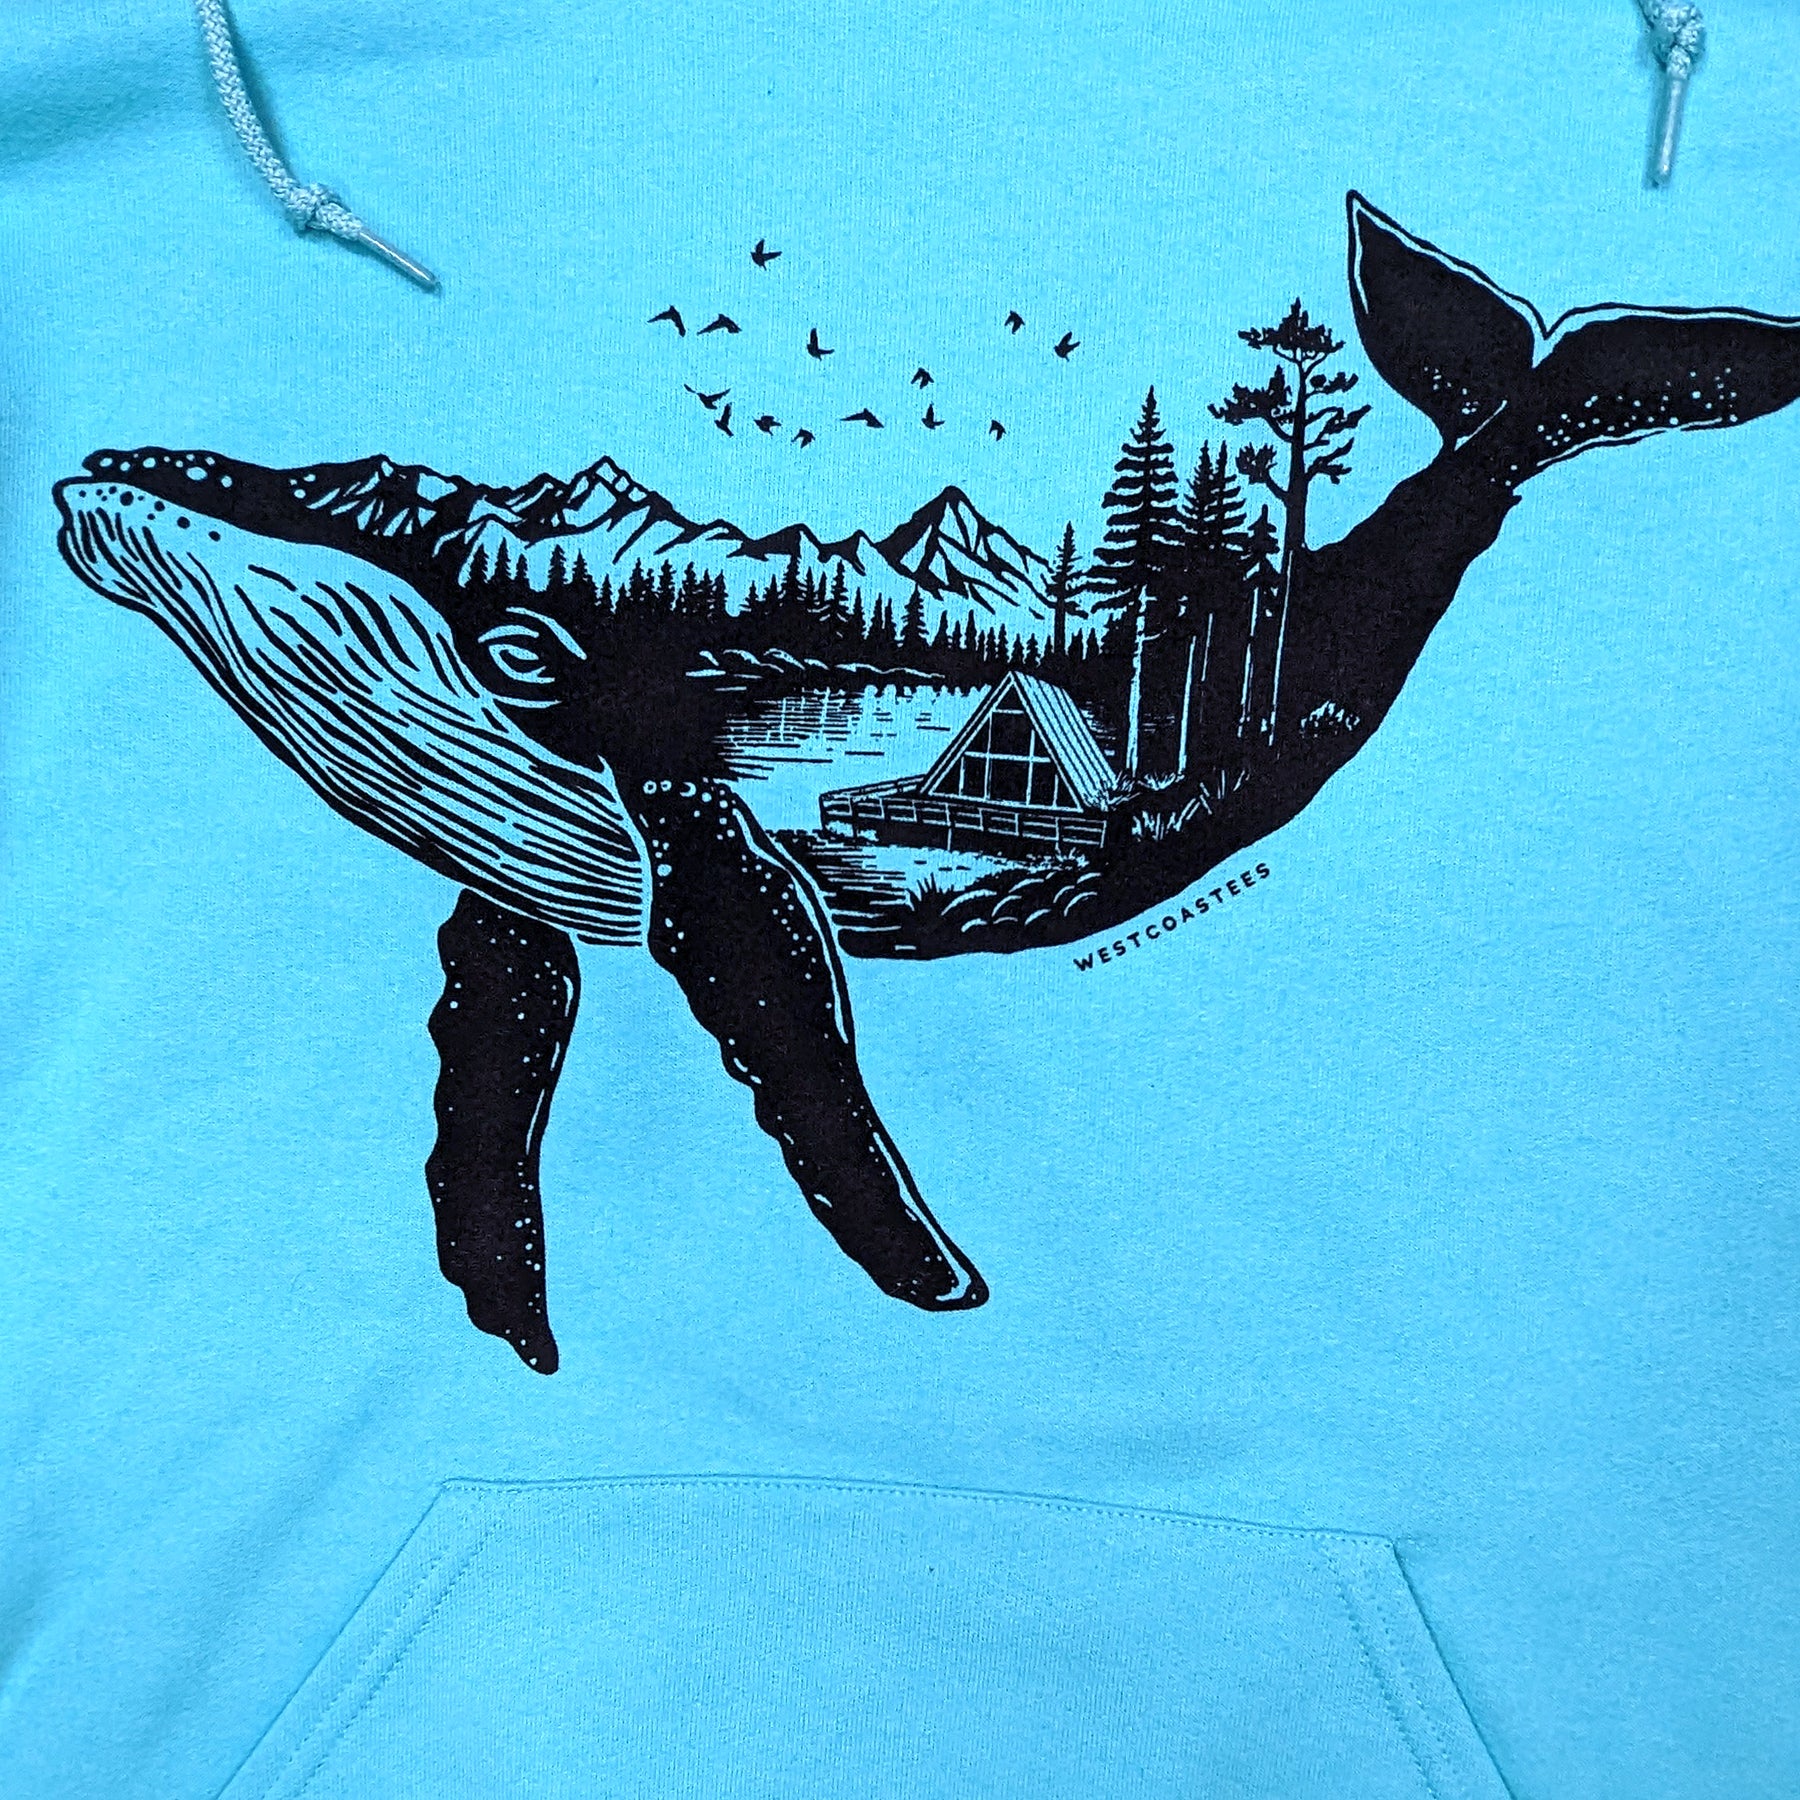 Adult Unisex A-Frame Whale Hoodie